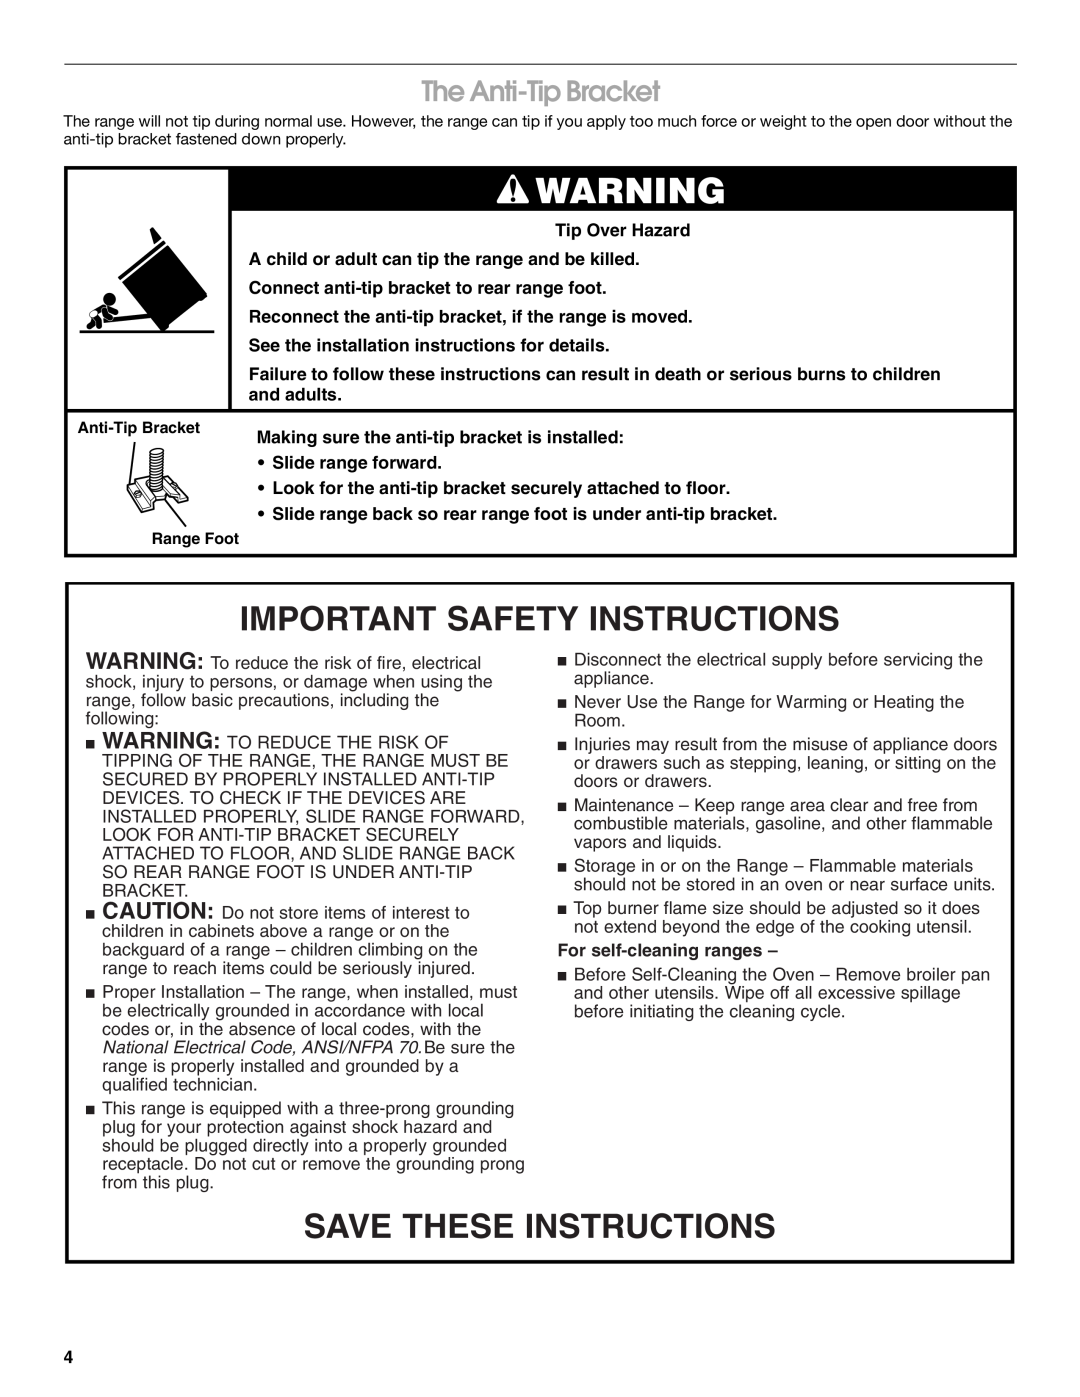 Whirlpool TGP305RV1 Important Safety Instructions, Save These Instructions, The Anti-Tip Bracket, For self-cleaning ranges 